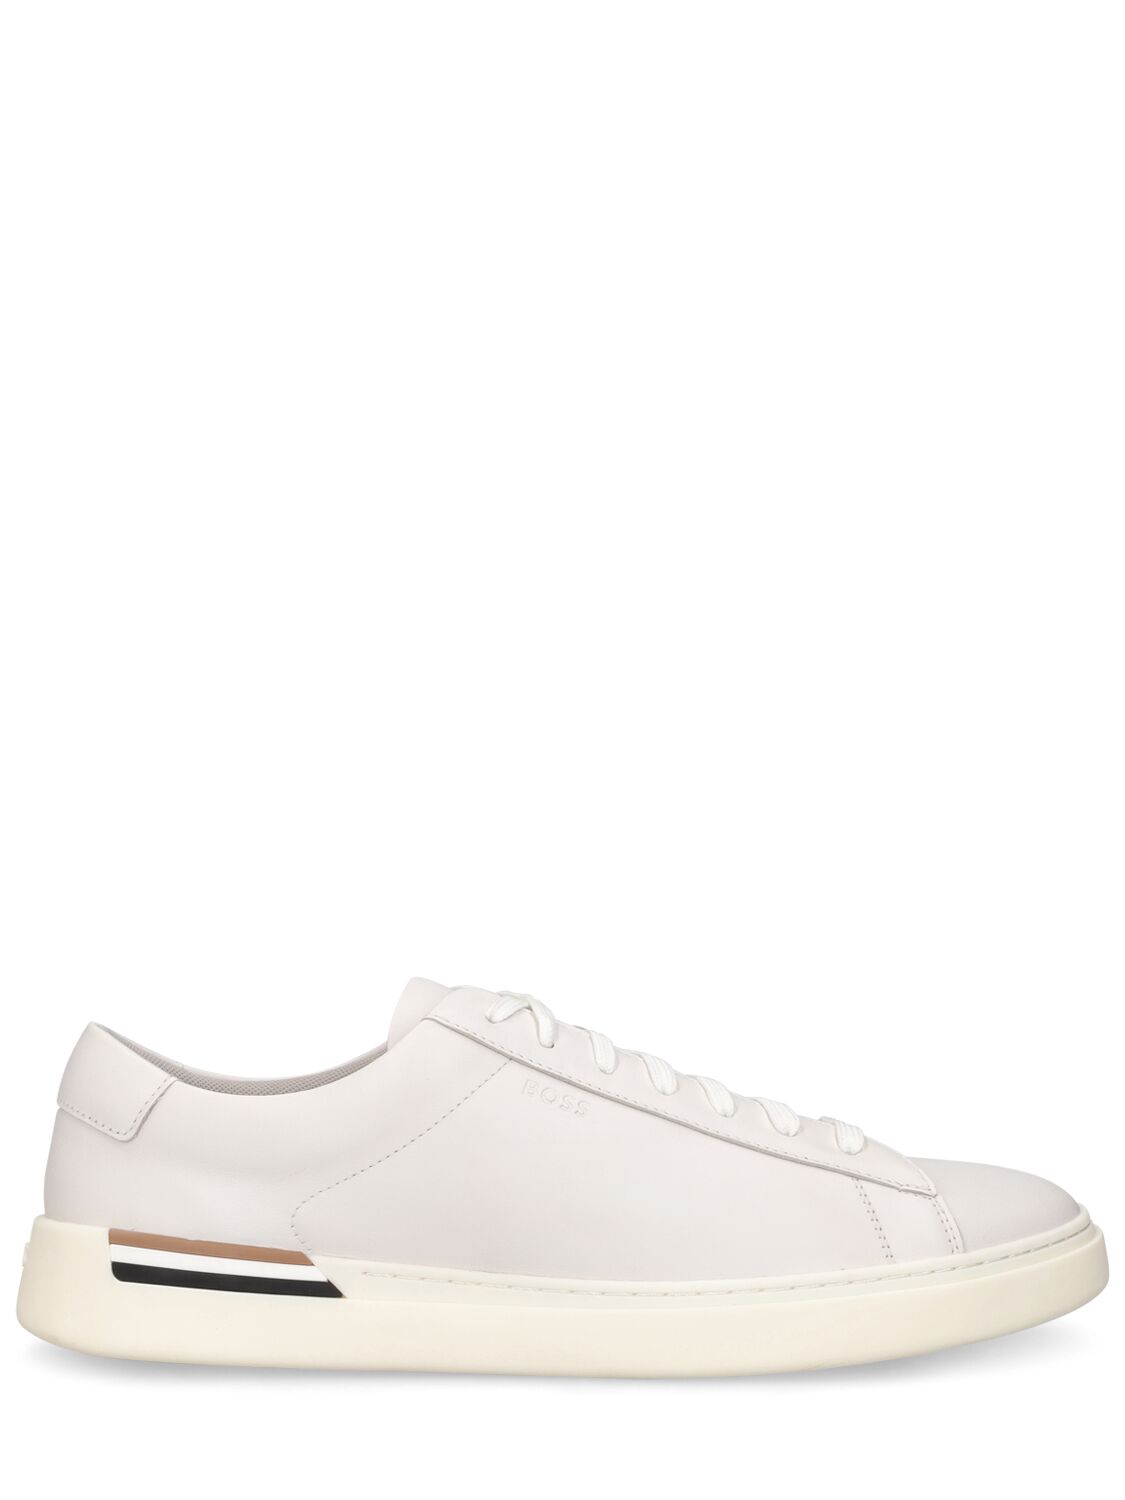 Hugo Boss Clint Tennltt Leather Low Top Trainers In White